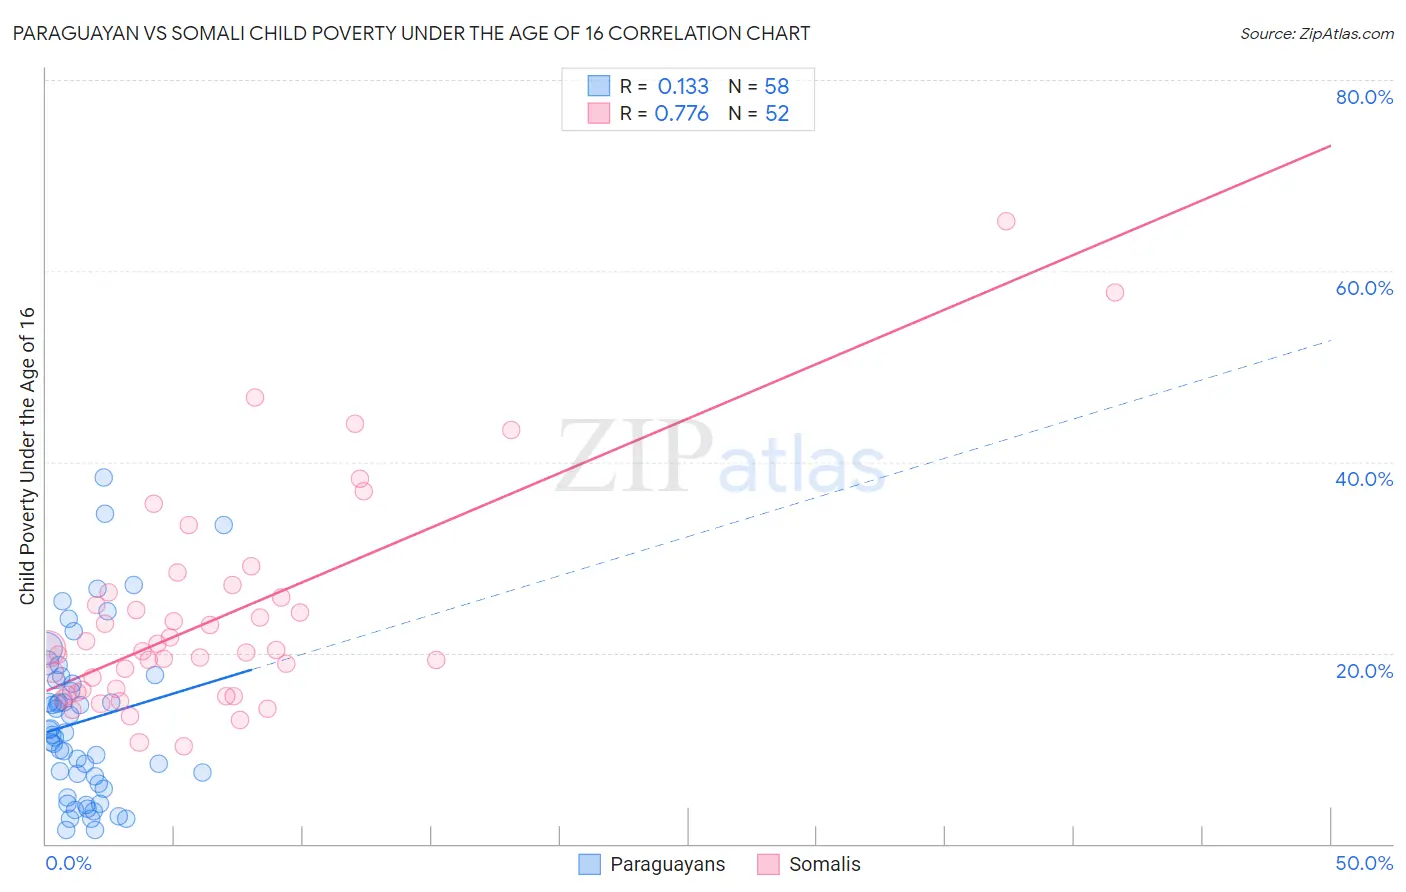 Paraguayan vs Somali Child Poverty Under the Age of 16